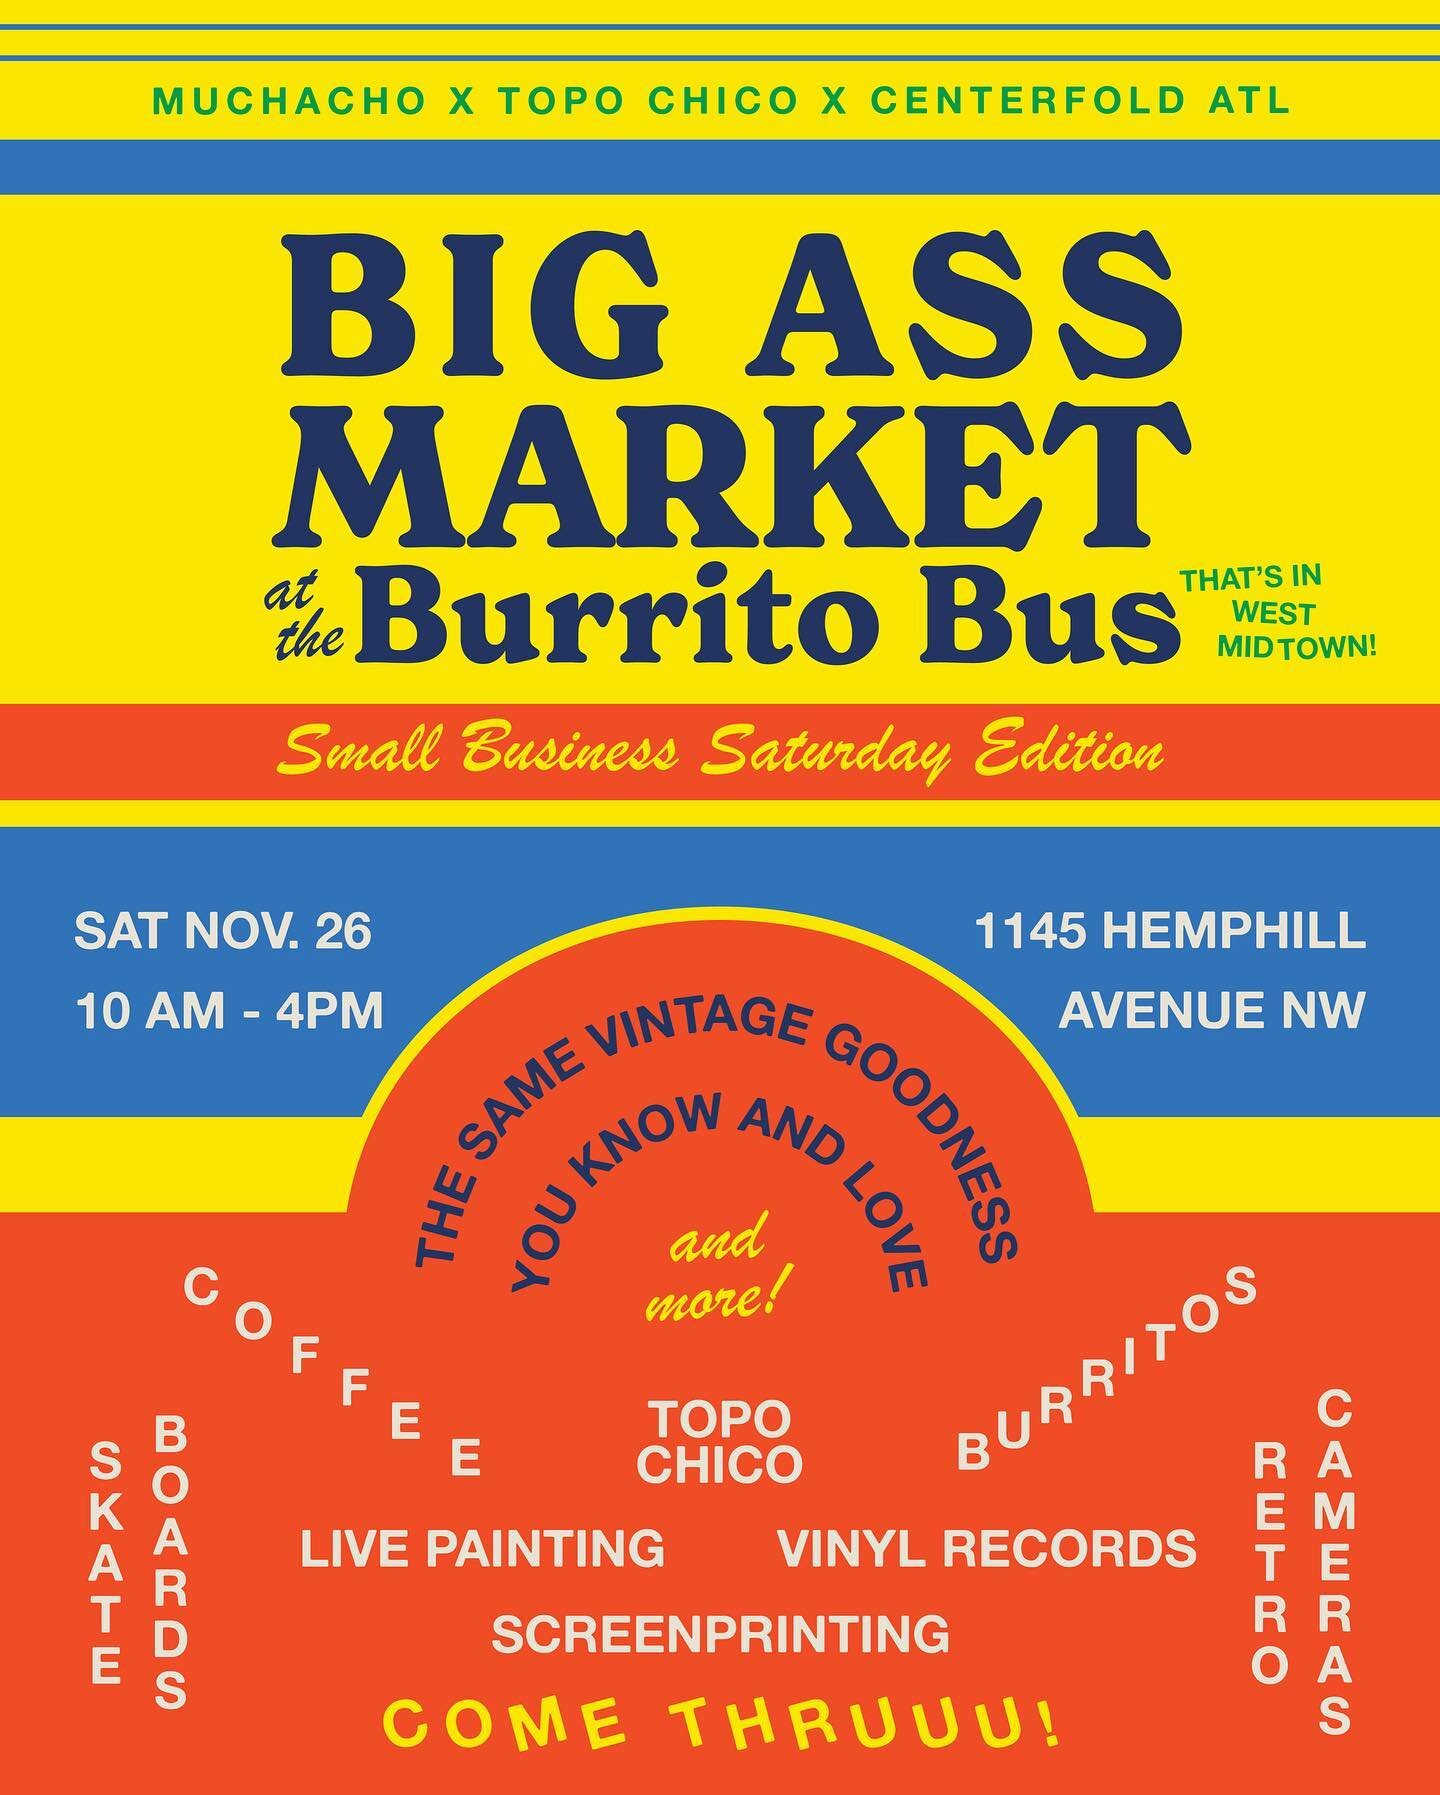 INTRODUCING.... 💥 The Big Ass Market @ The Burrito Bus! 💥 A new monthly market in partnership with @topochicousa and @centerfold.atl - all the vintage goodness you know and love from our weekly markets, plus even MORE!
⠀
Join us at the Burrito Bus 